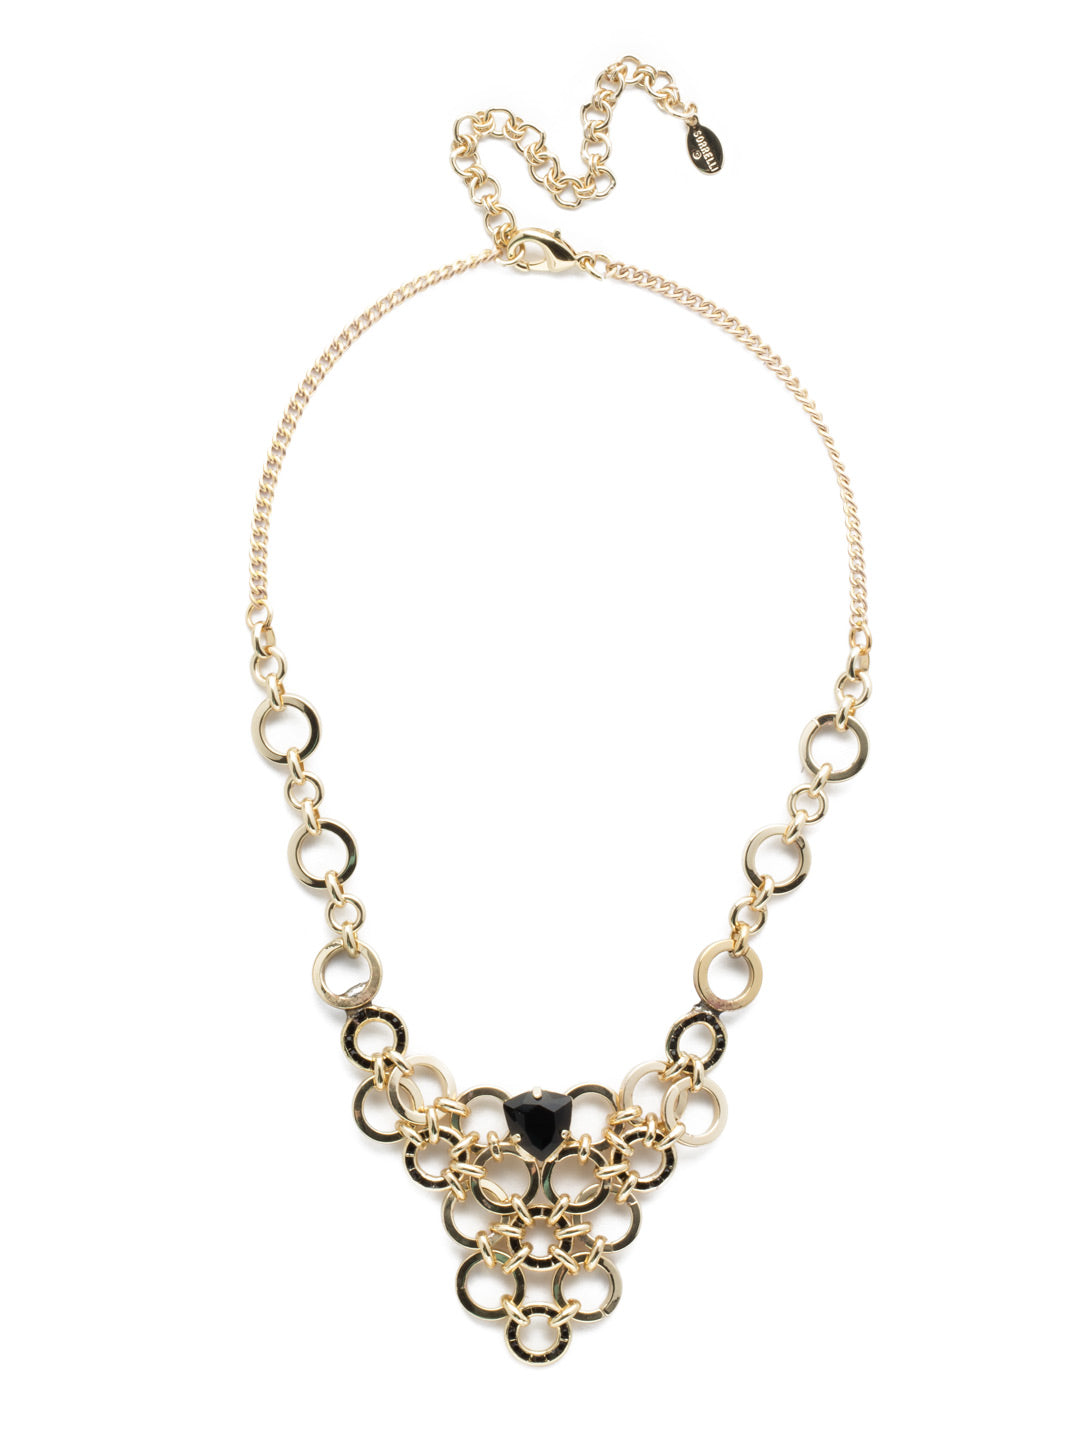 Linnia Link Statement Necklace - 4NEF8BGJET - <p>A trillion cut center crystal, channel set crystal circles and fun circular metal accents come together in a one-of-a-kind adjustable bib with a lobster clasp closure. From Sorrelli's Jet collection in our Bright Gold-tone finish.</p>